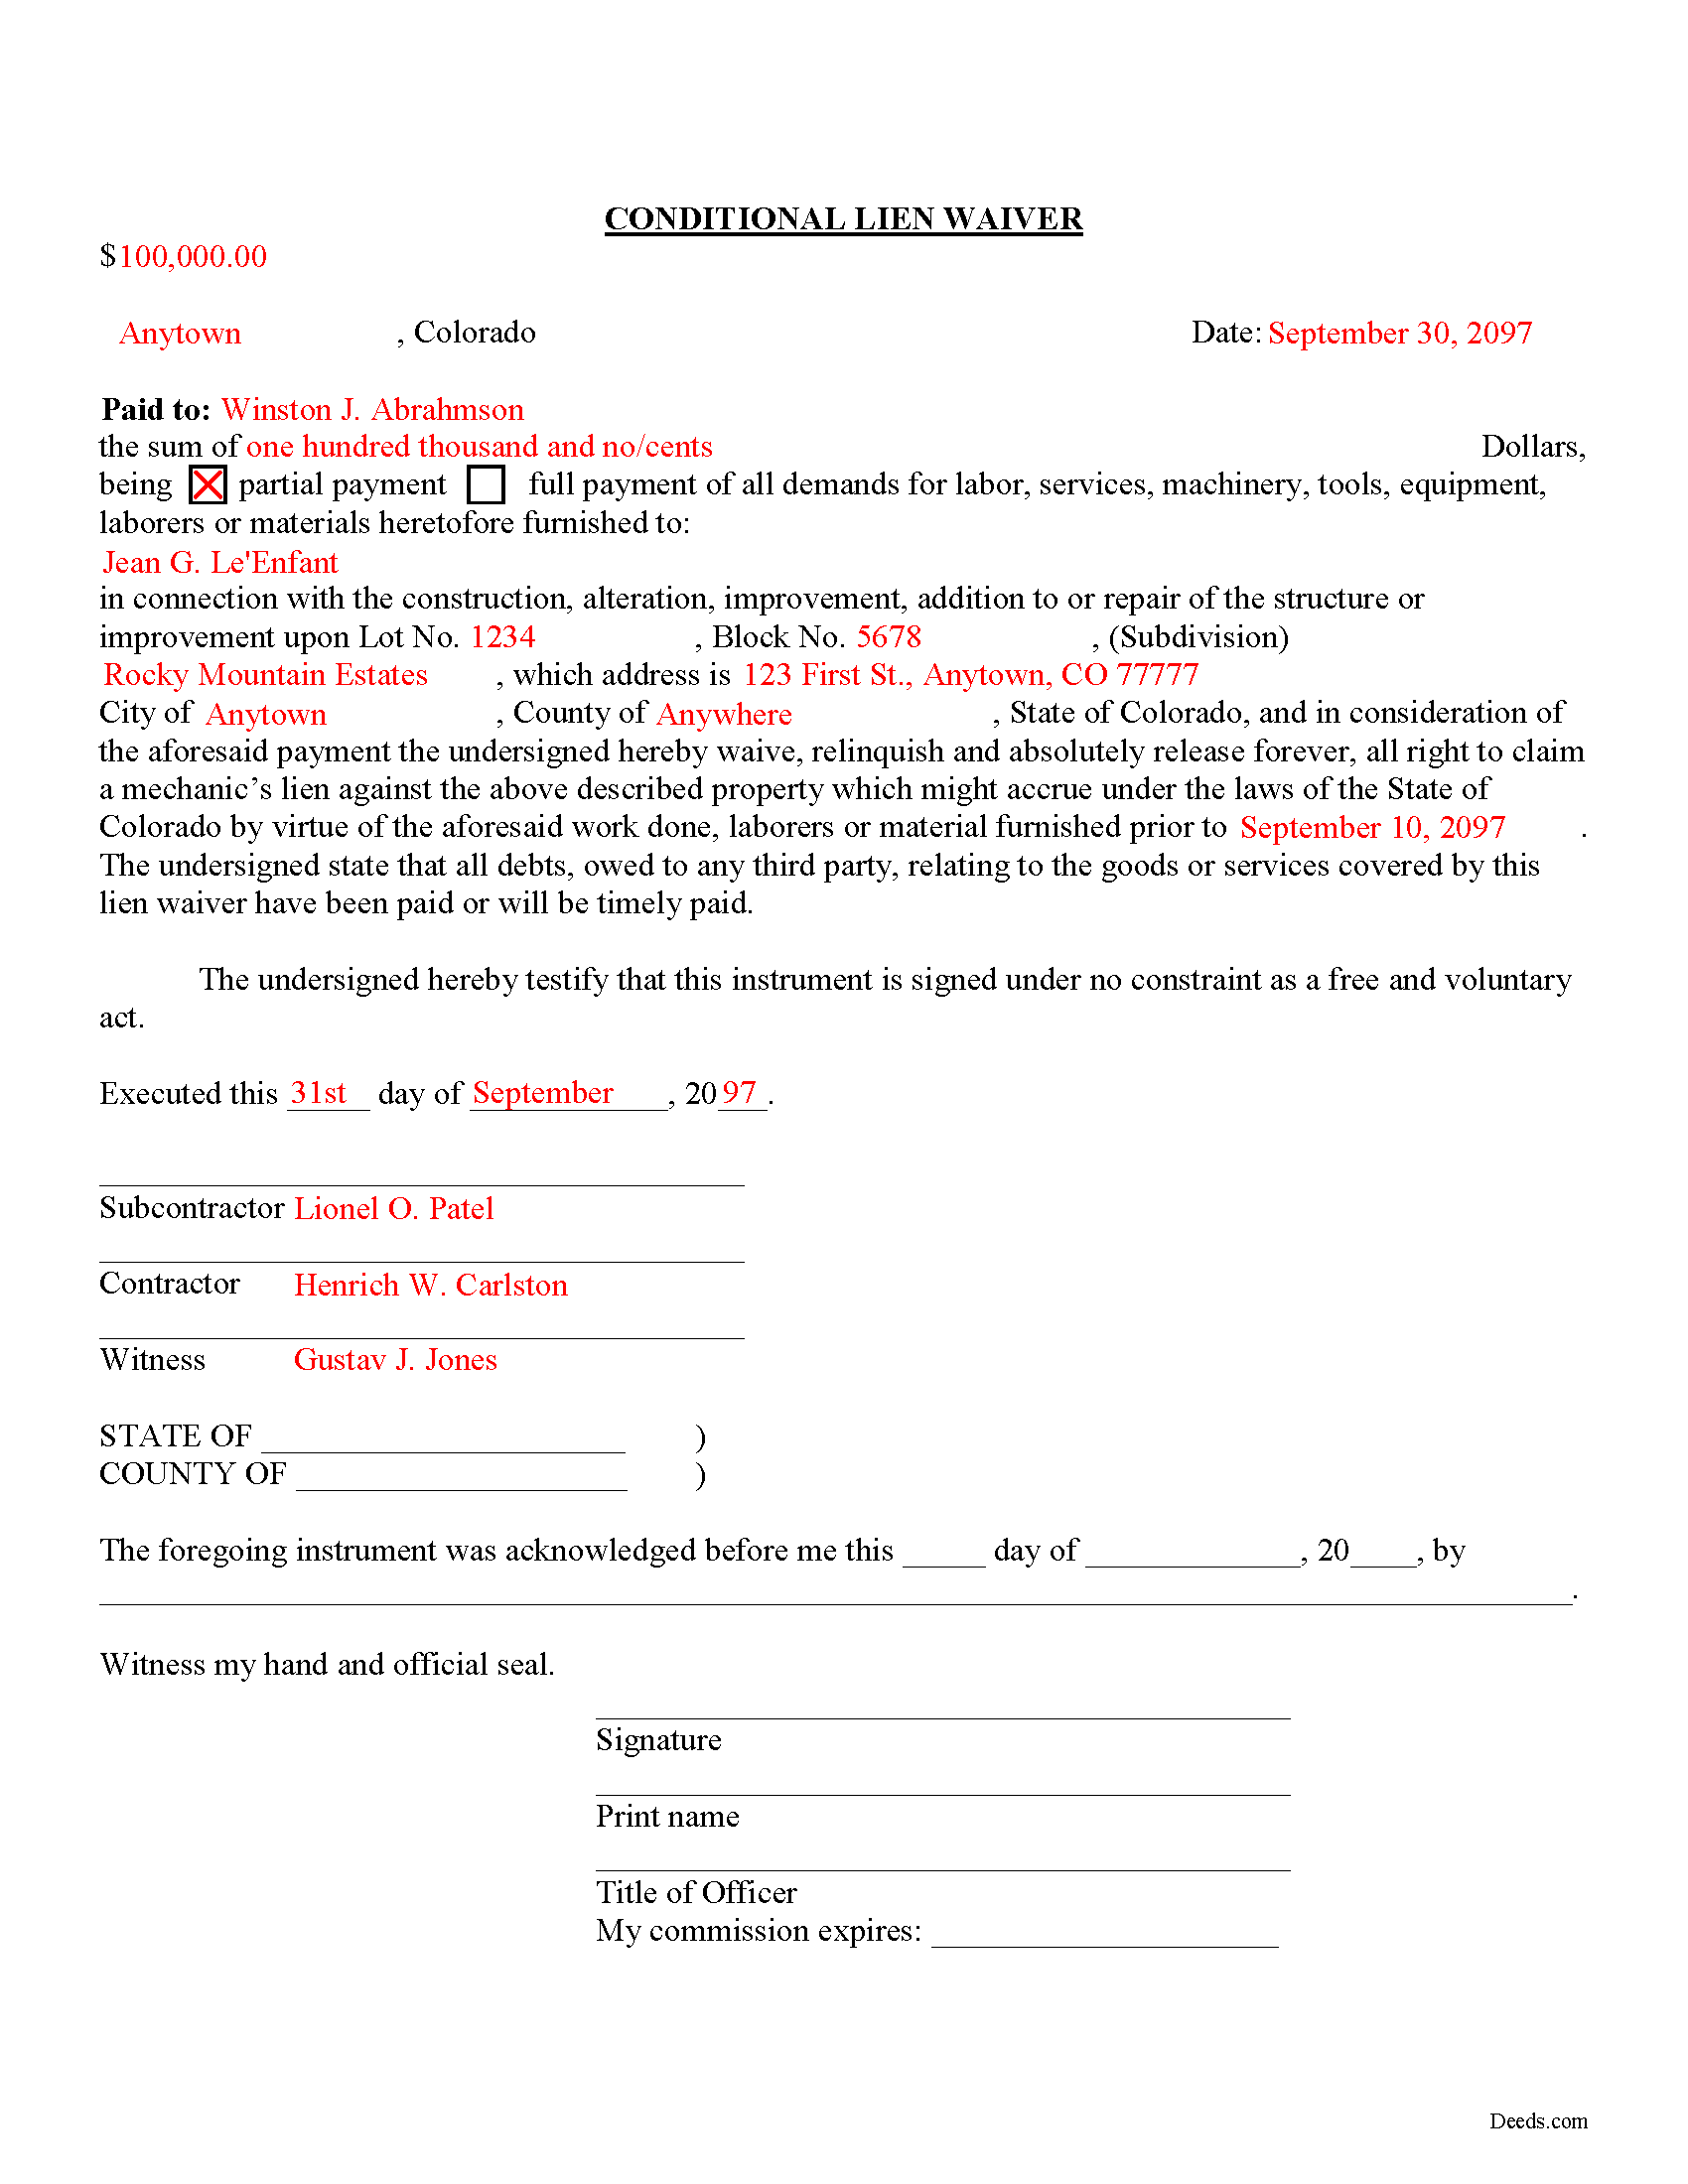 Completed Example of the Conditional Lien Waiver Document